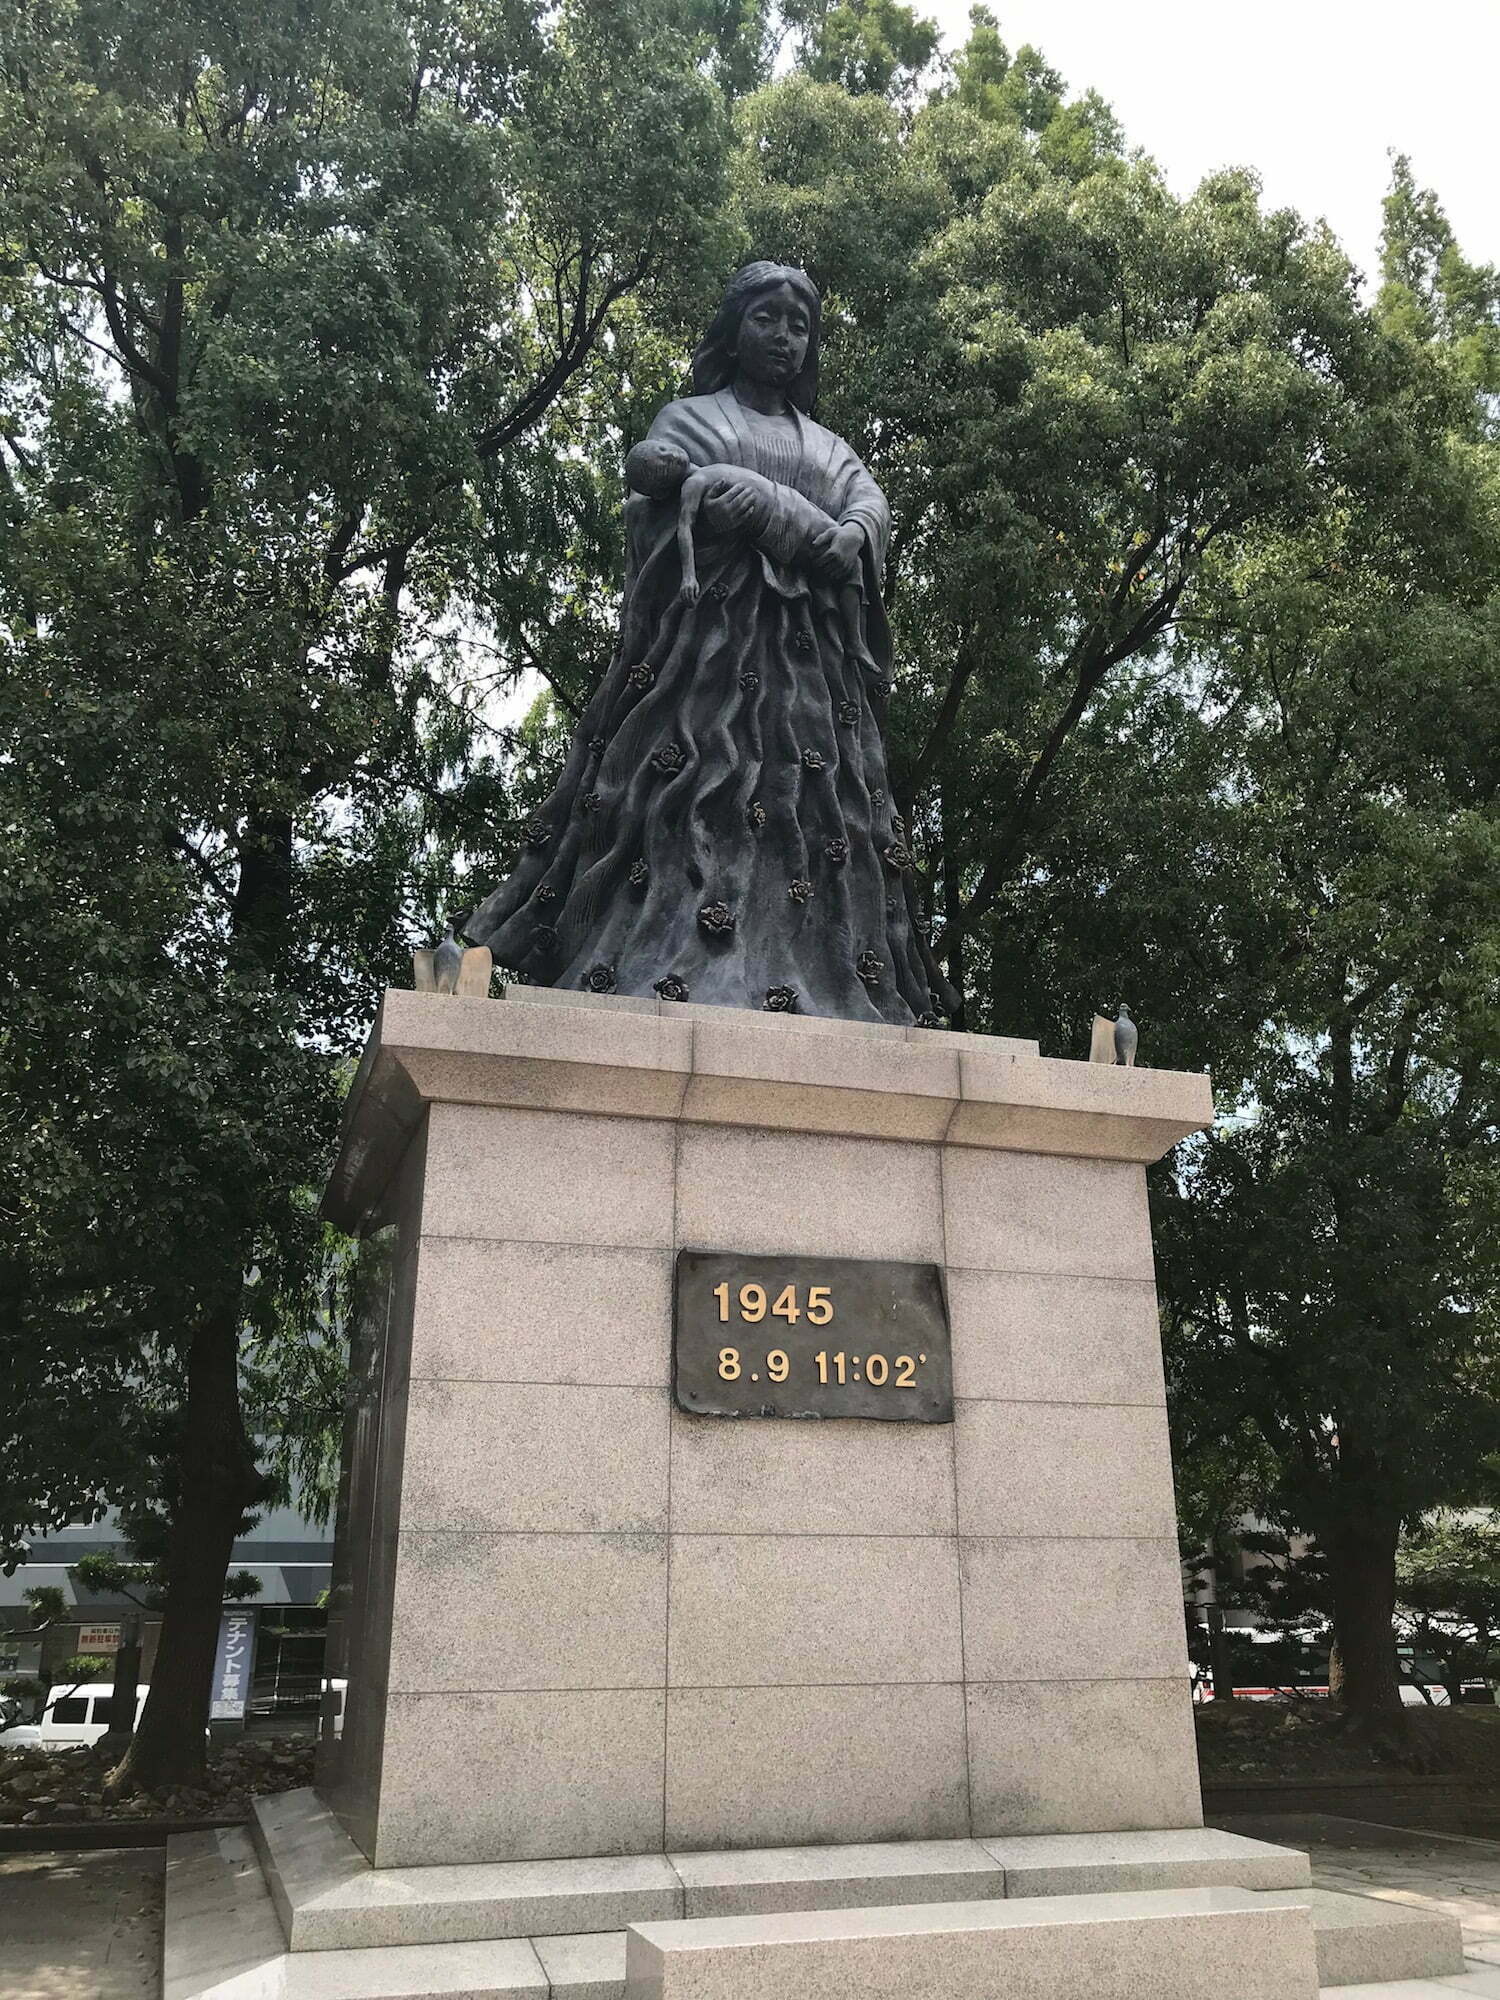 Statue of peace after 50 years